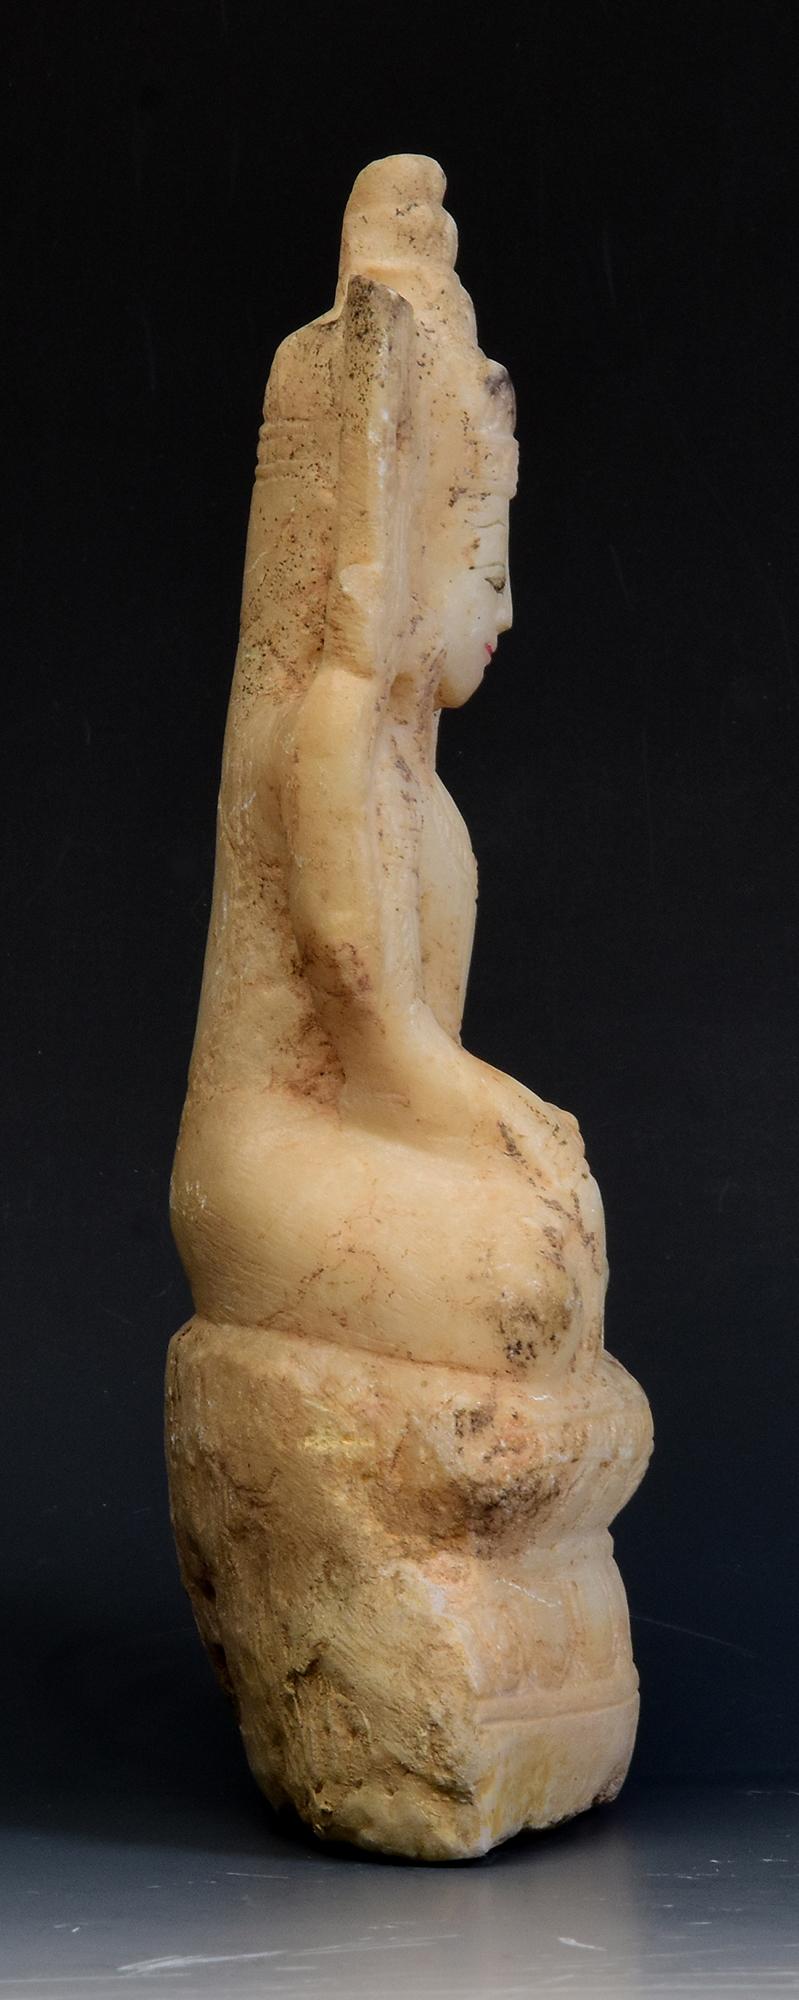 18th C., Shan, Rare Antique Burmese Alabaster Marble Seated King Buddha Statue For Sale 7